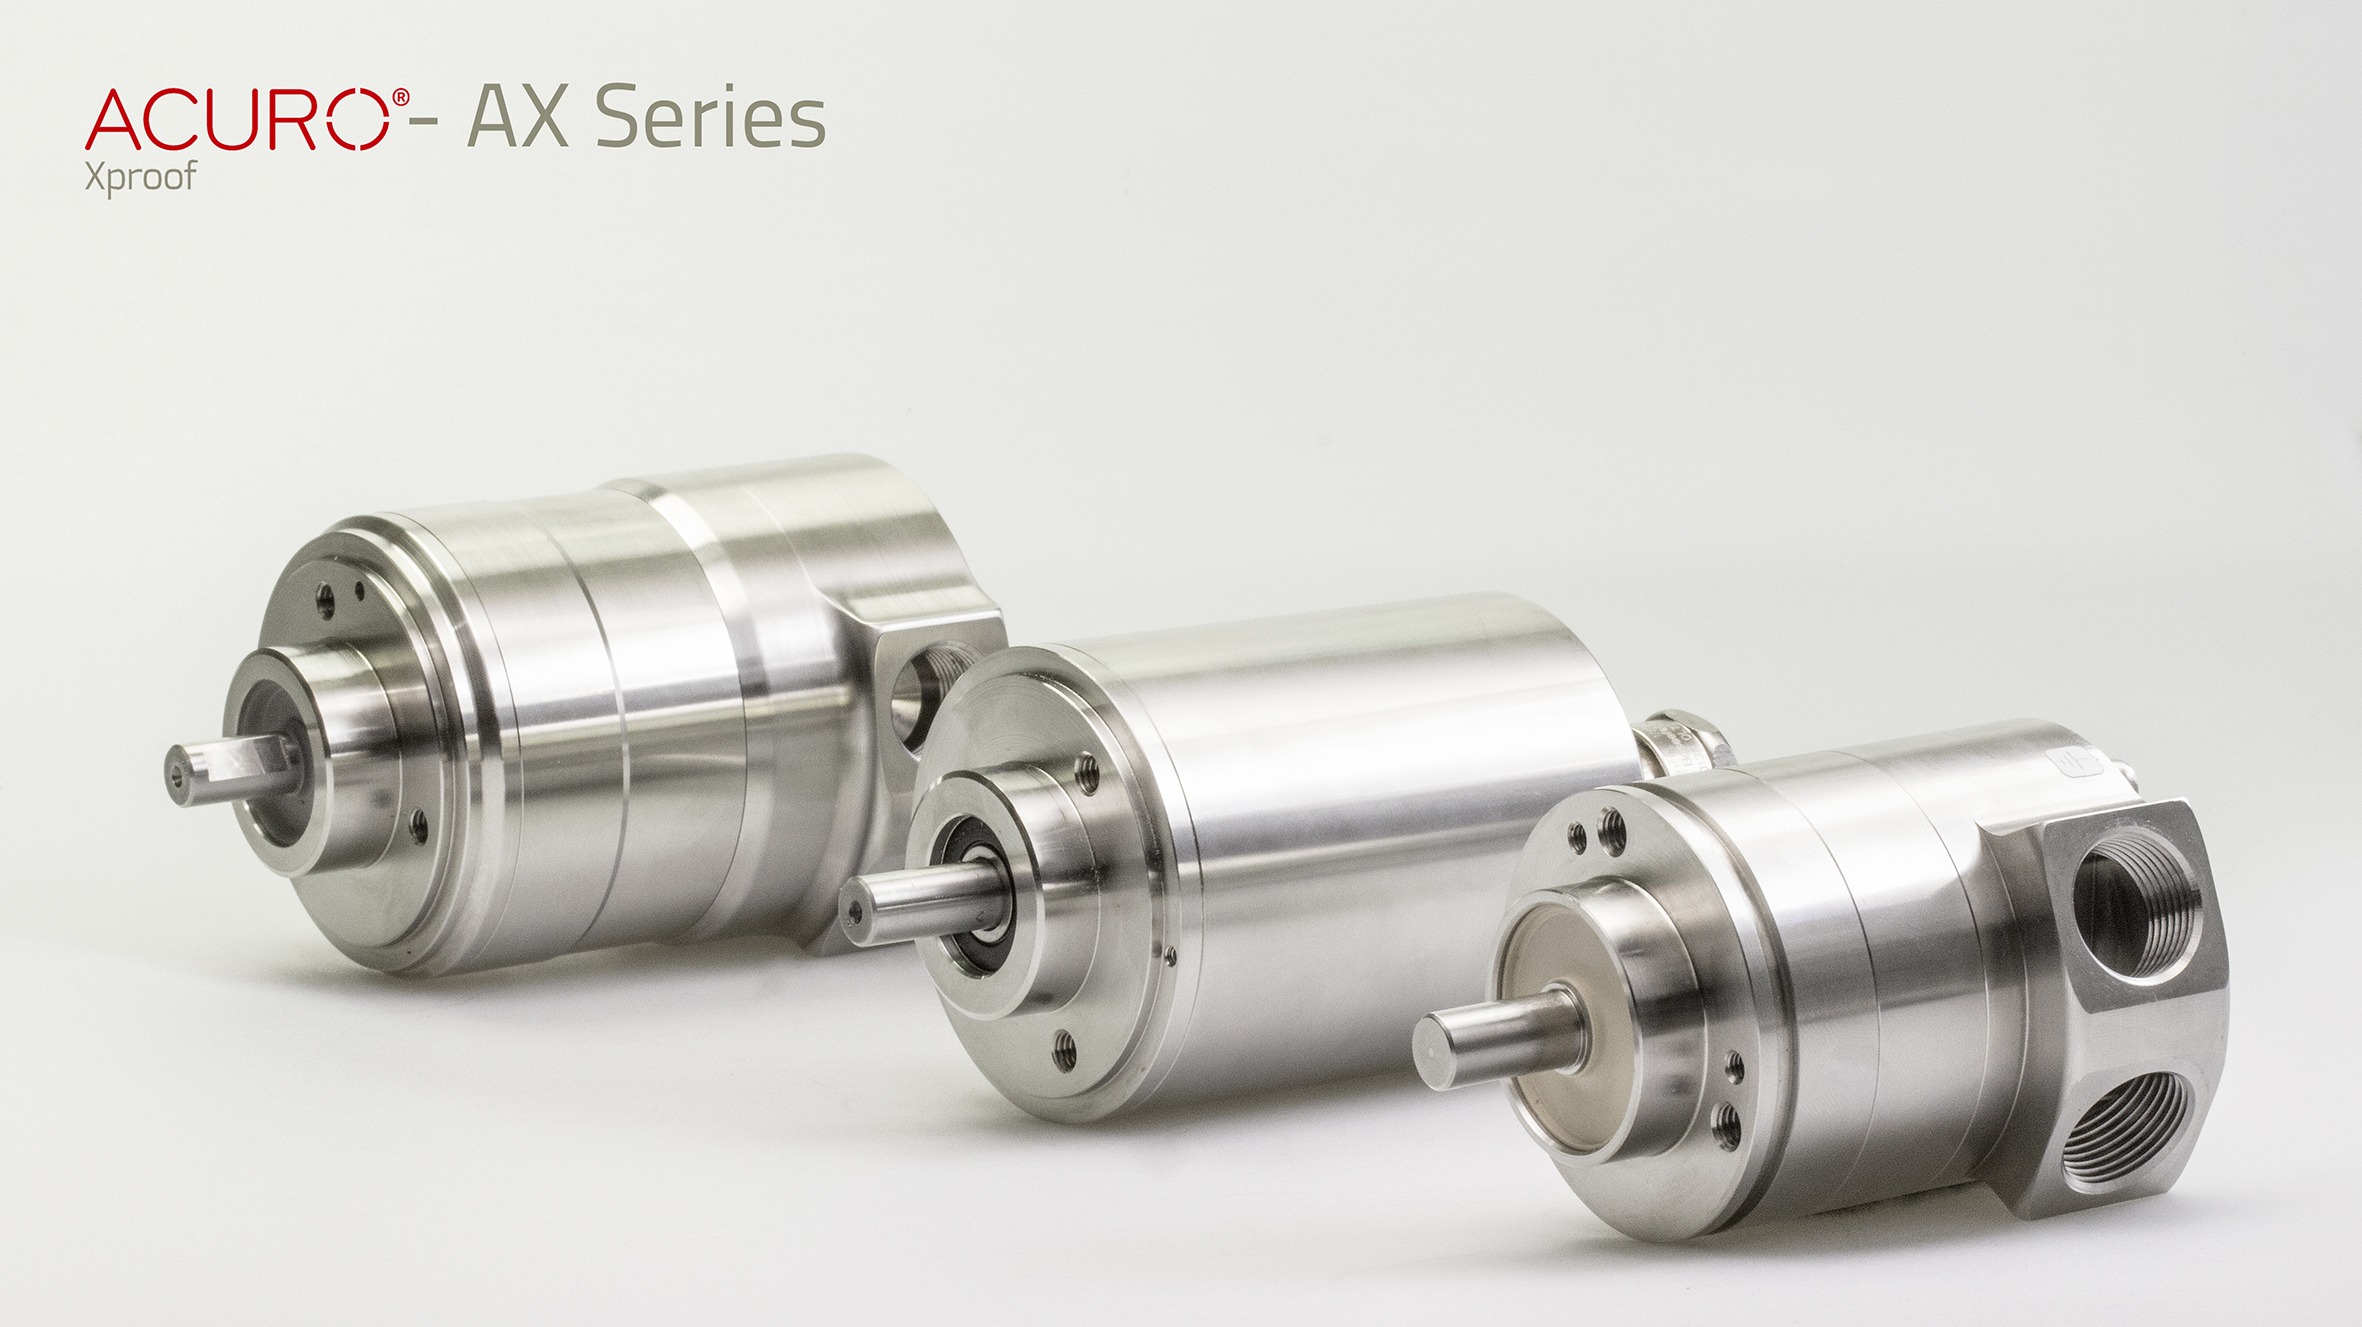 The introduction of the AX73 completes the family of ATEX-rated absolute rotary encoders from Hengstler